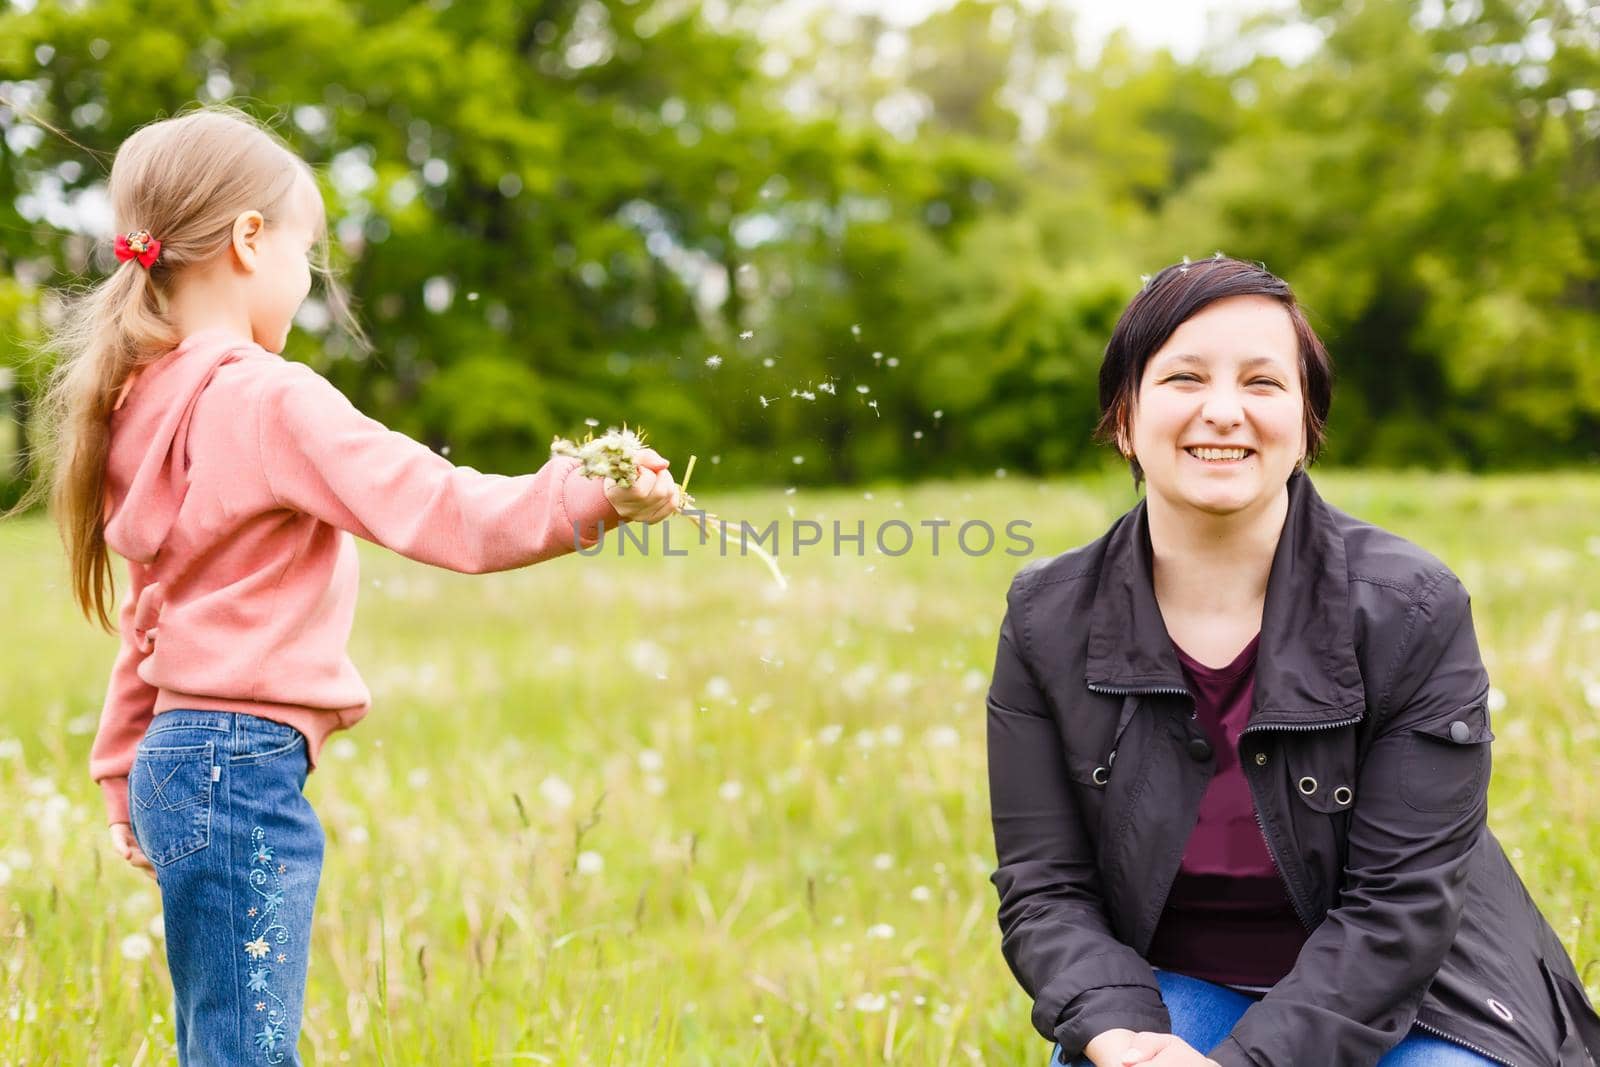 Mother with small daughter blowing to dandelion - lifestyle outdoors scene in park